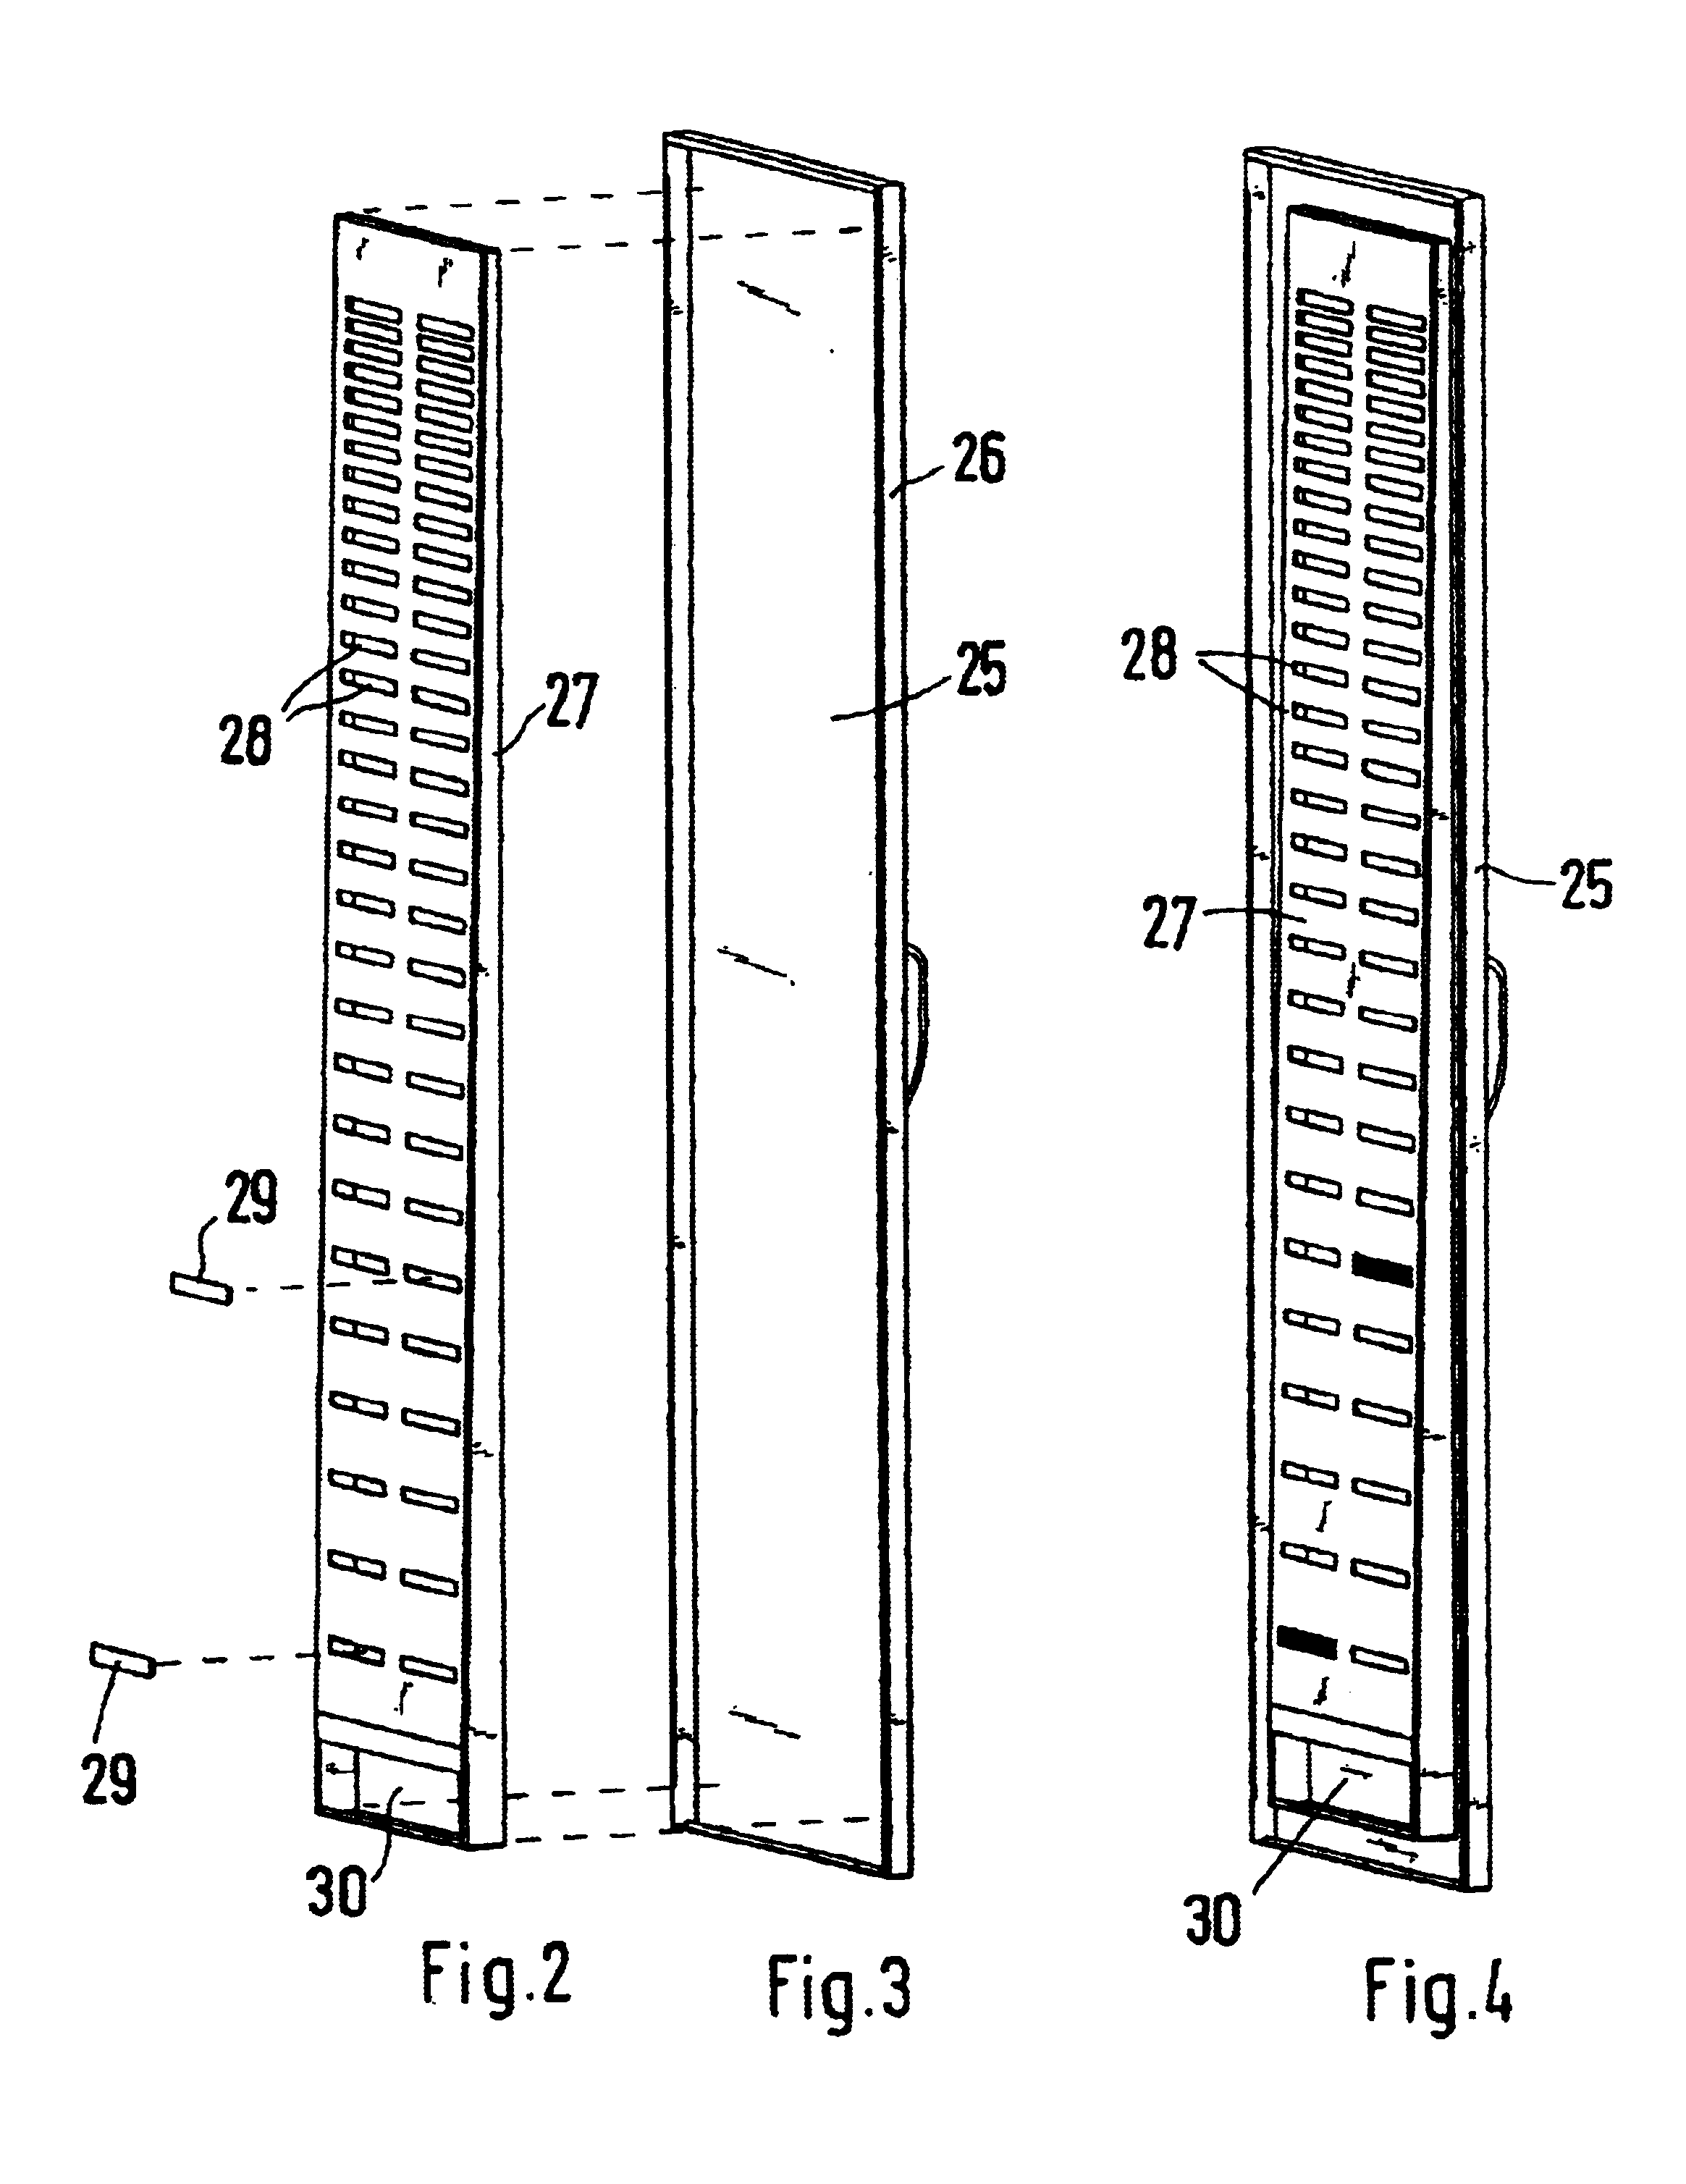 Switchgear cabinet with at least one cabinet door and a fan-assisted air circulation on an interior